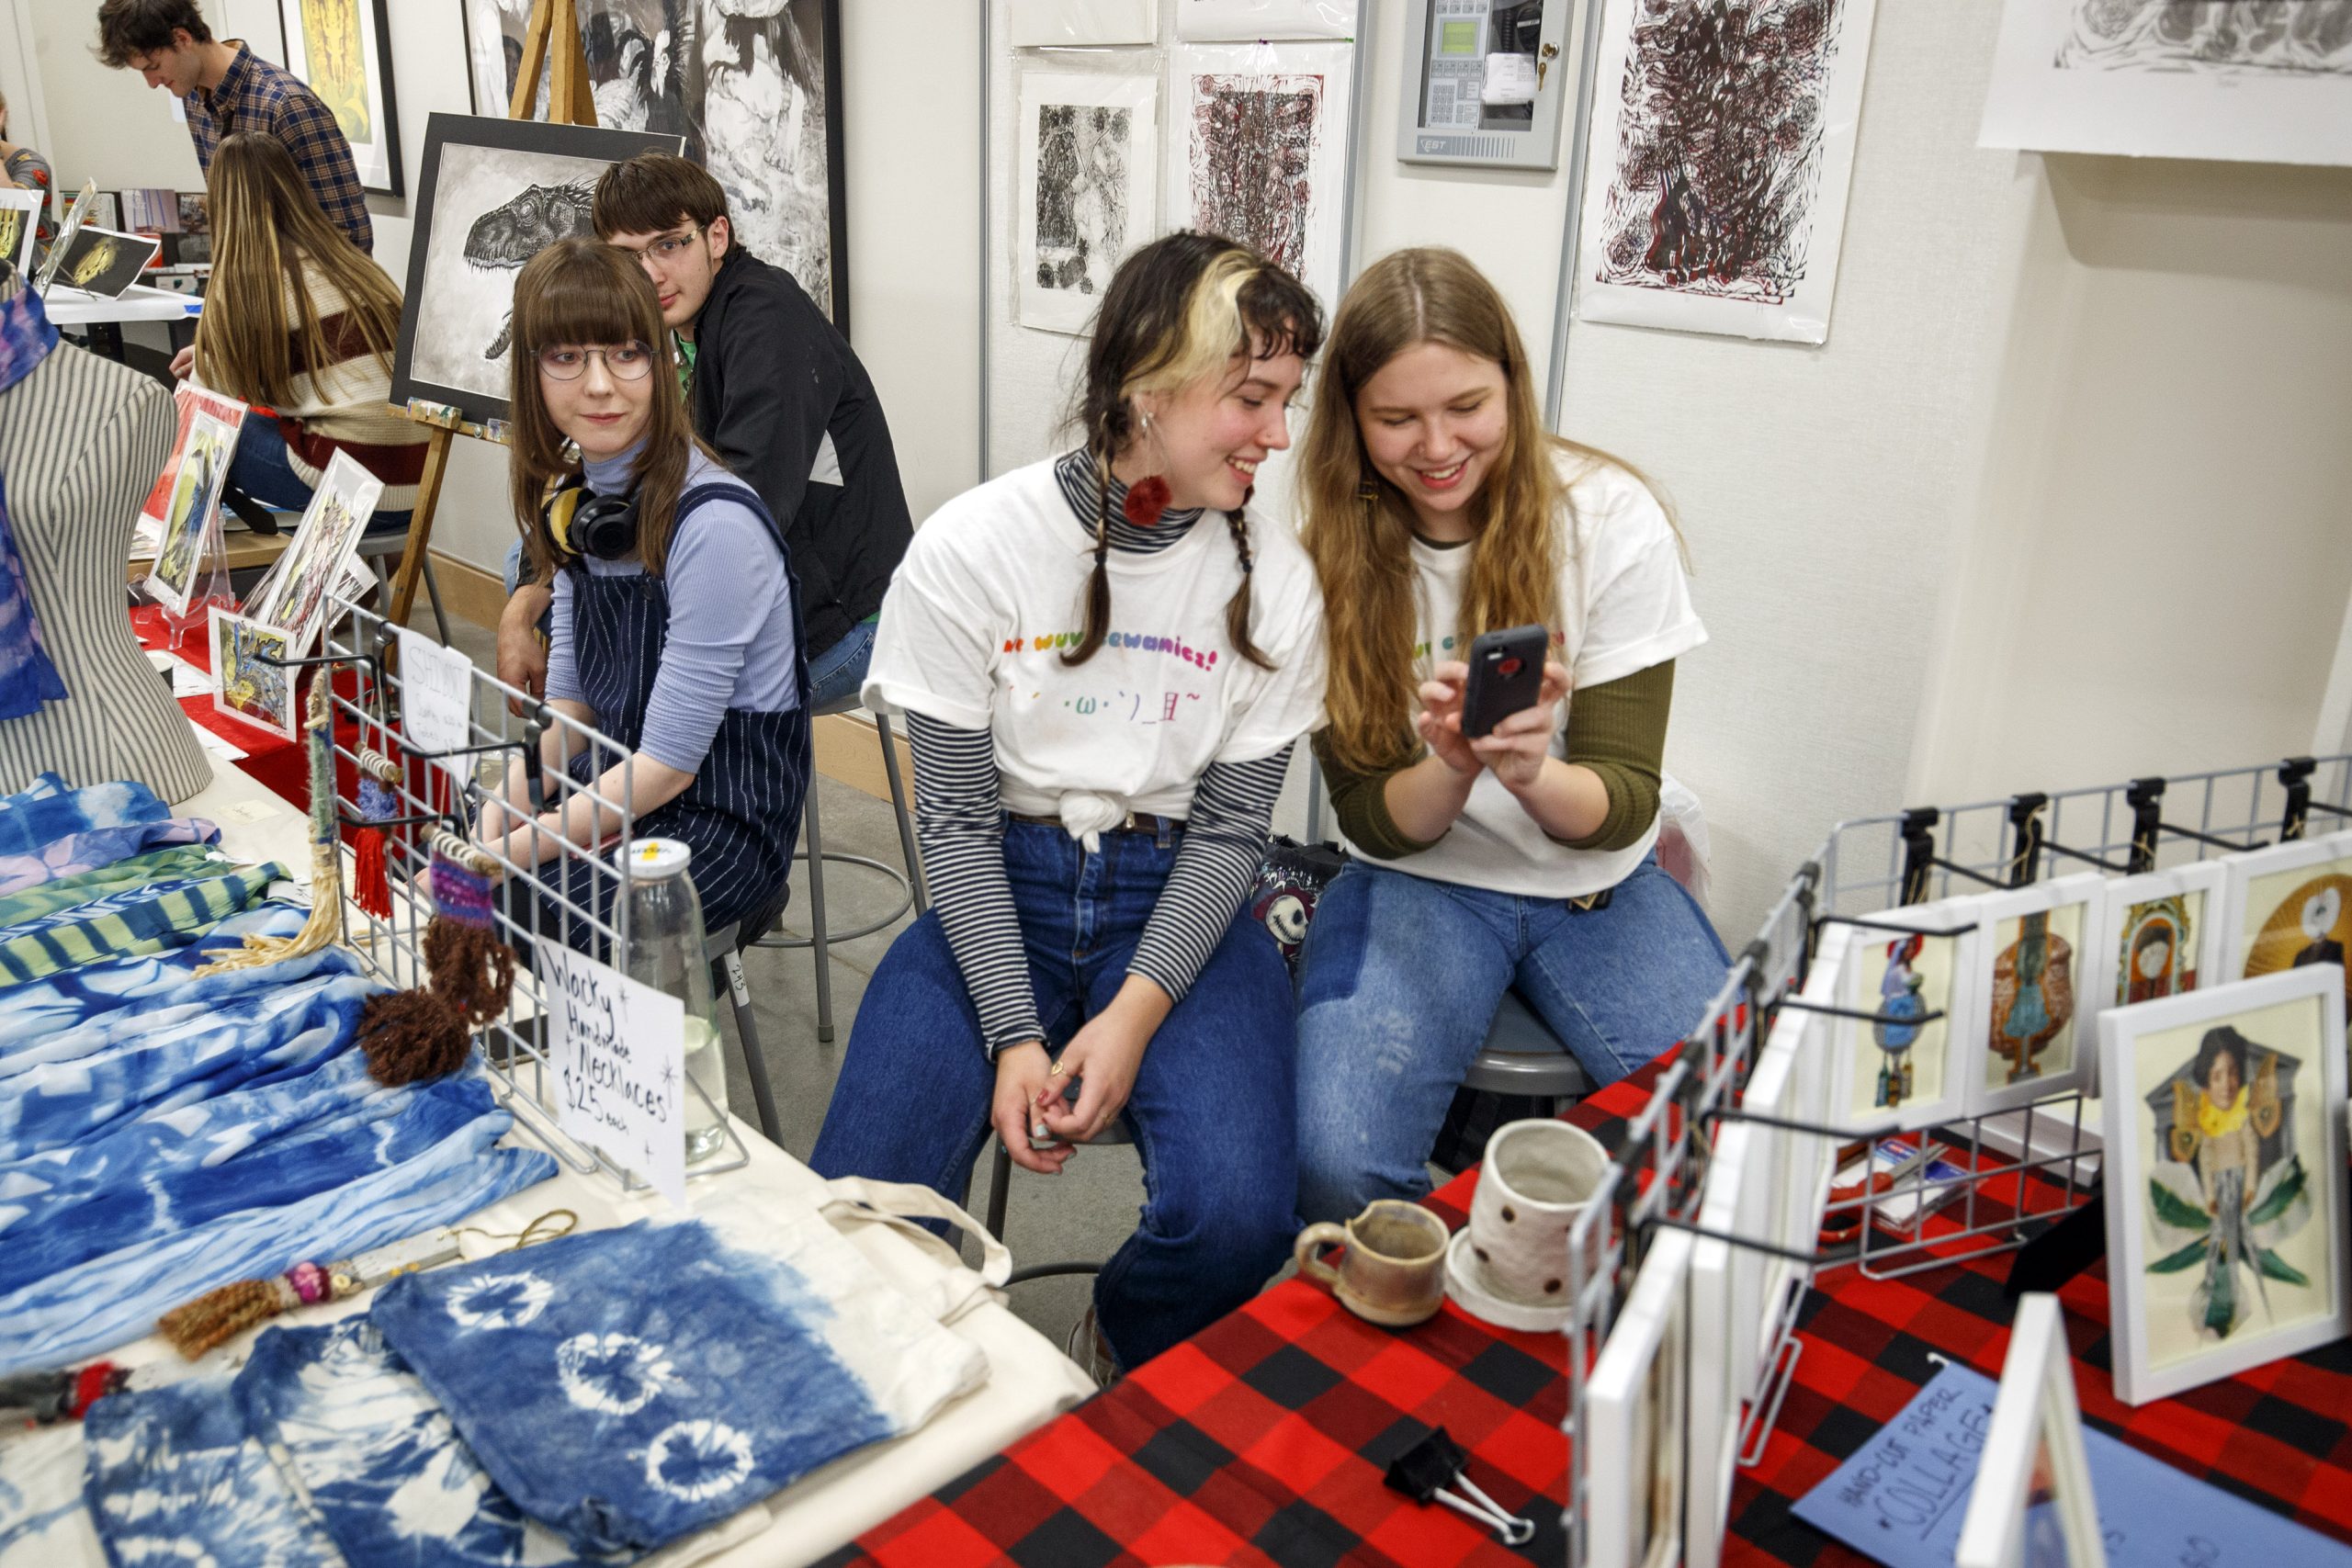 UA Little Rock students display their artwork during the Holiday Art Sale.